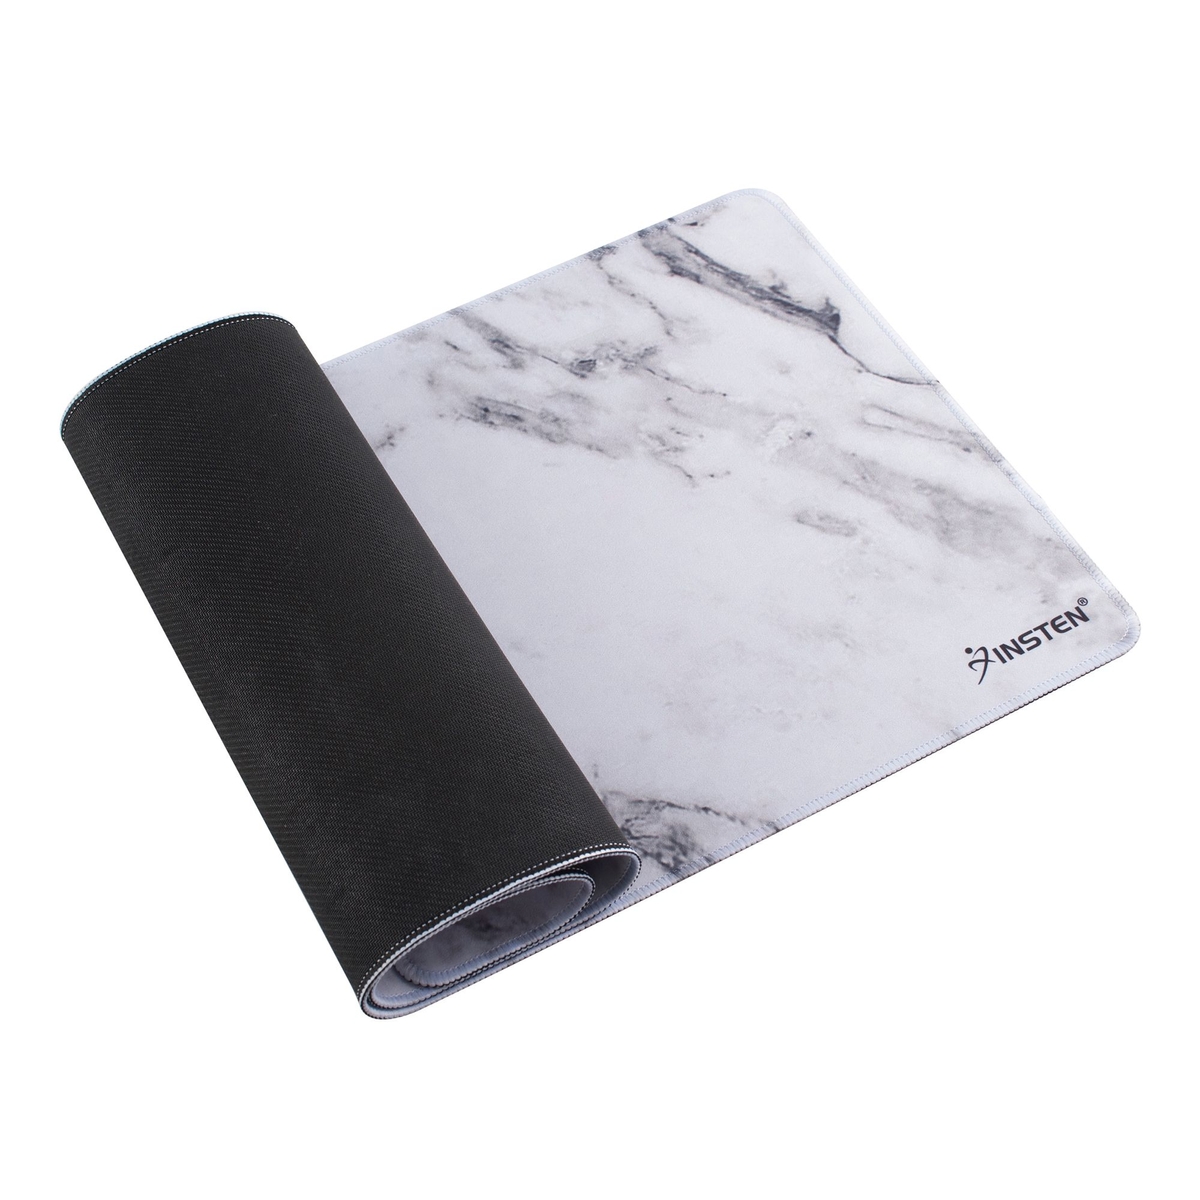 Insten Extended Gaming Mouse Pad Marble Design Long Mat (Size: 31" x 12") with Low Friction Smooth Surface and Non-Slip Backing for Desktop Mouse Keyboard Laptop White - image 3 of 9